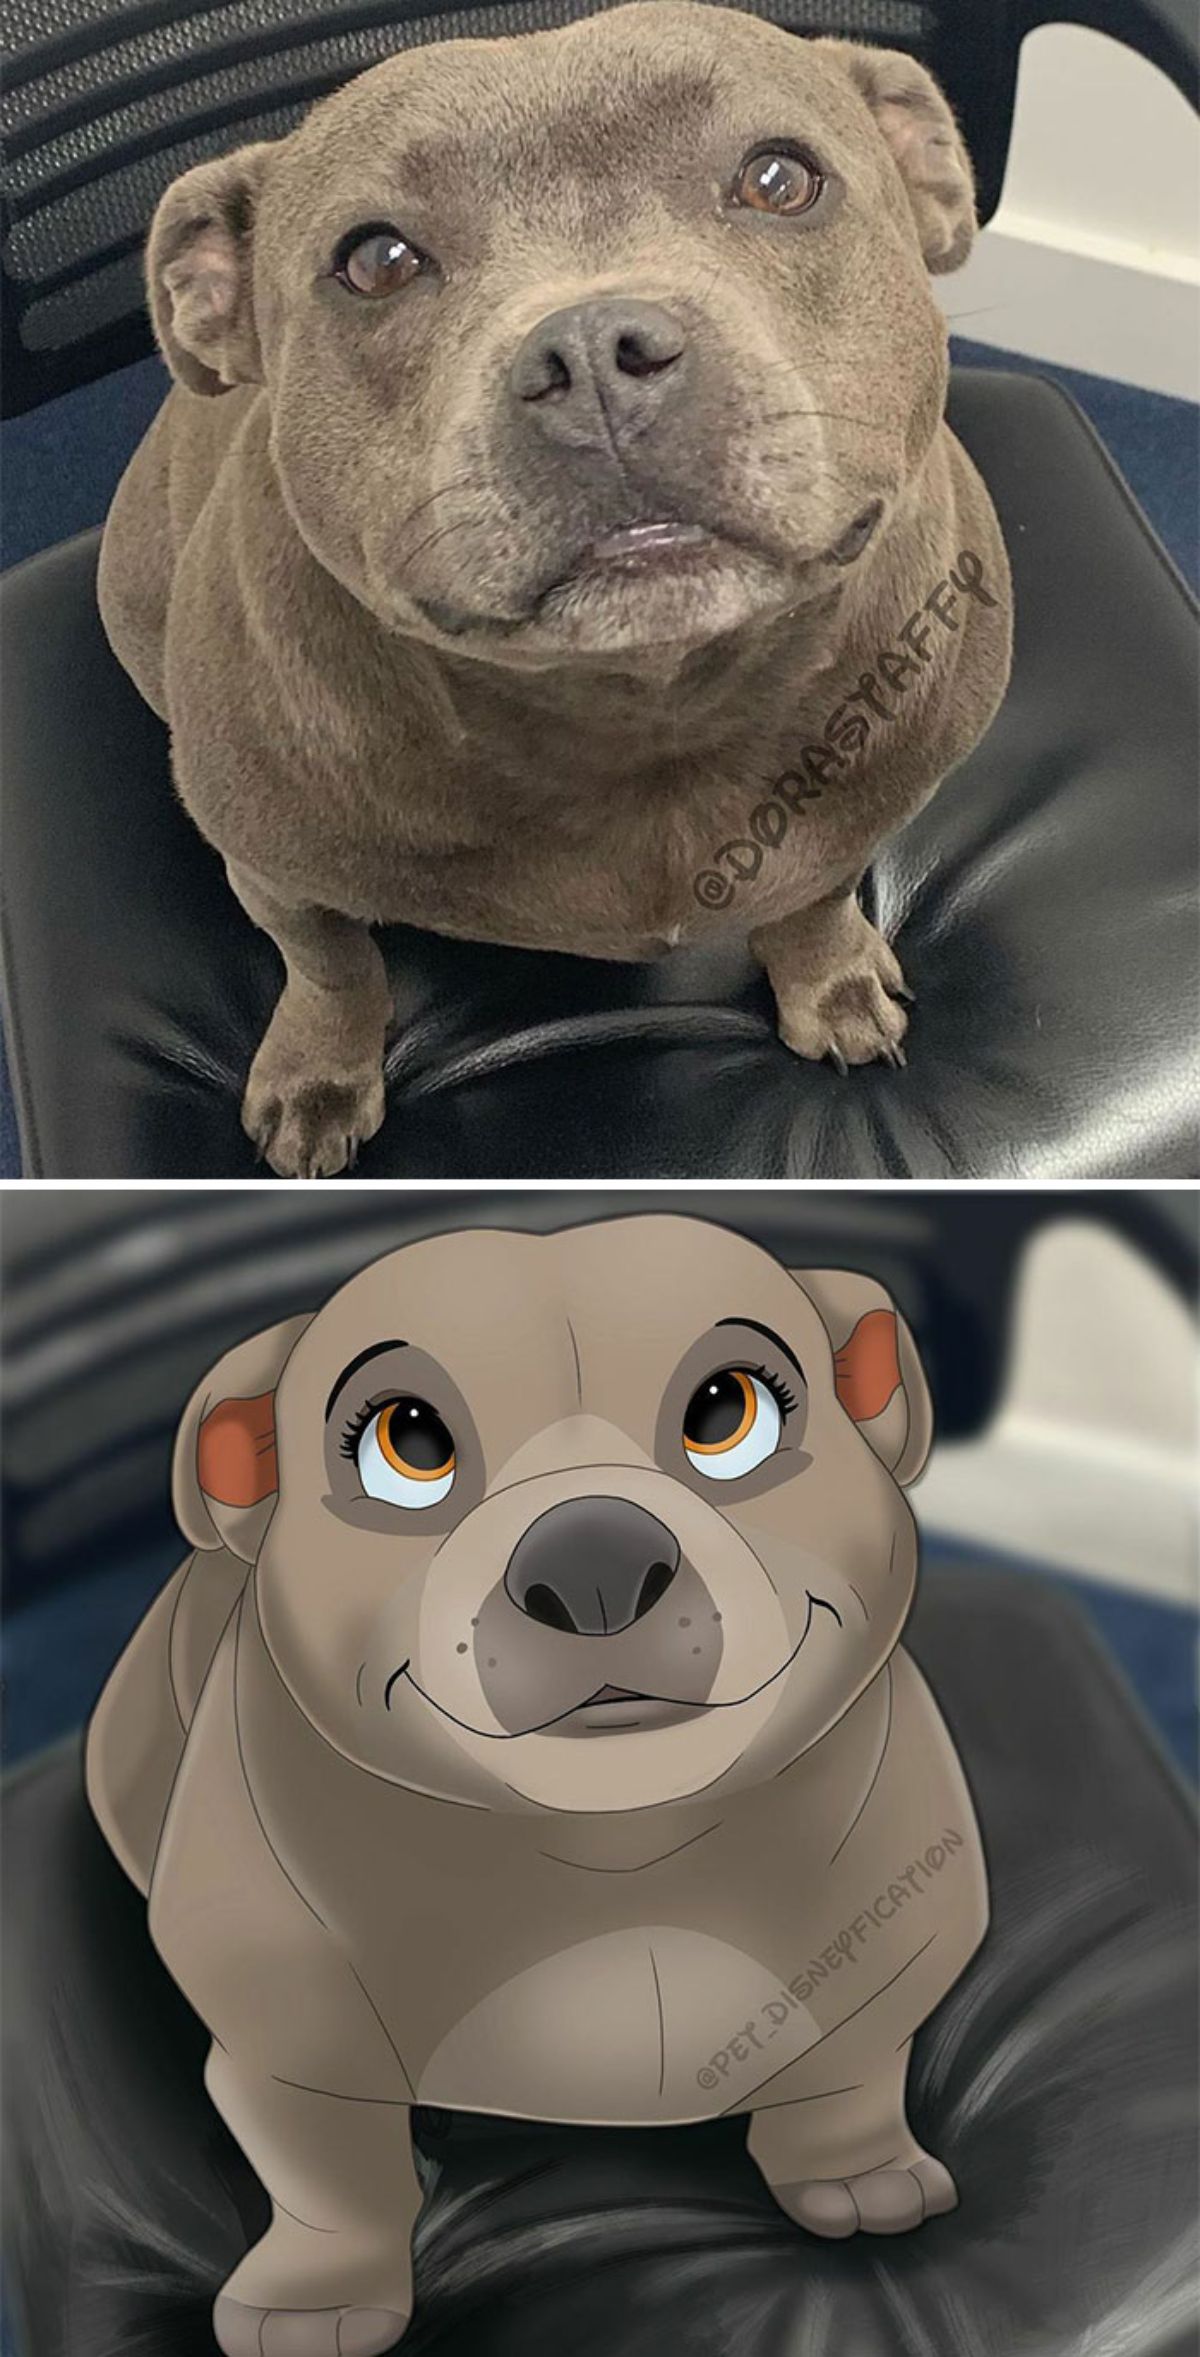 real photo and cartoon image of a brown pitbull sitting on a black ottoman and looking up